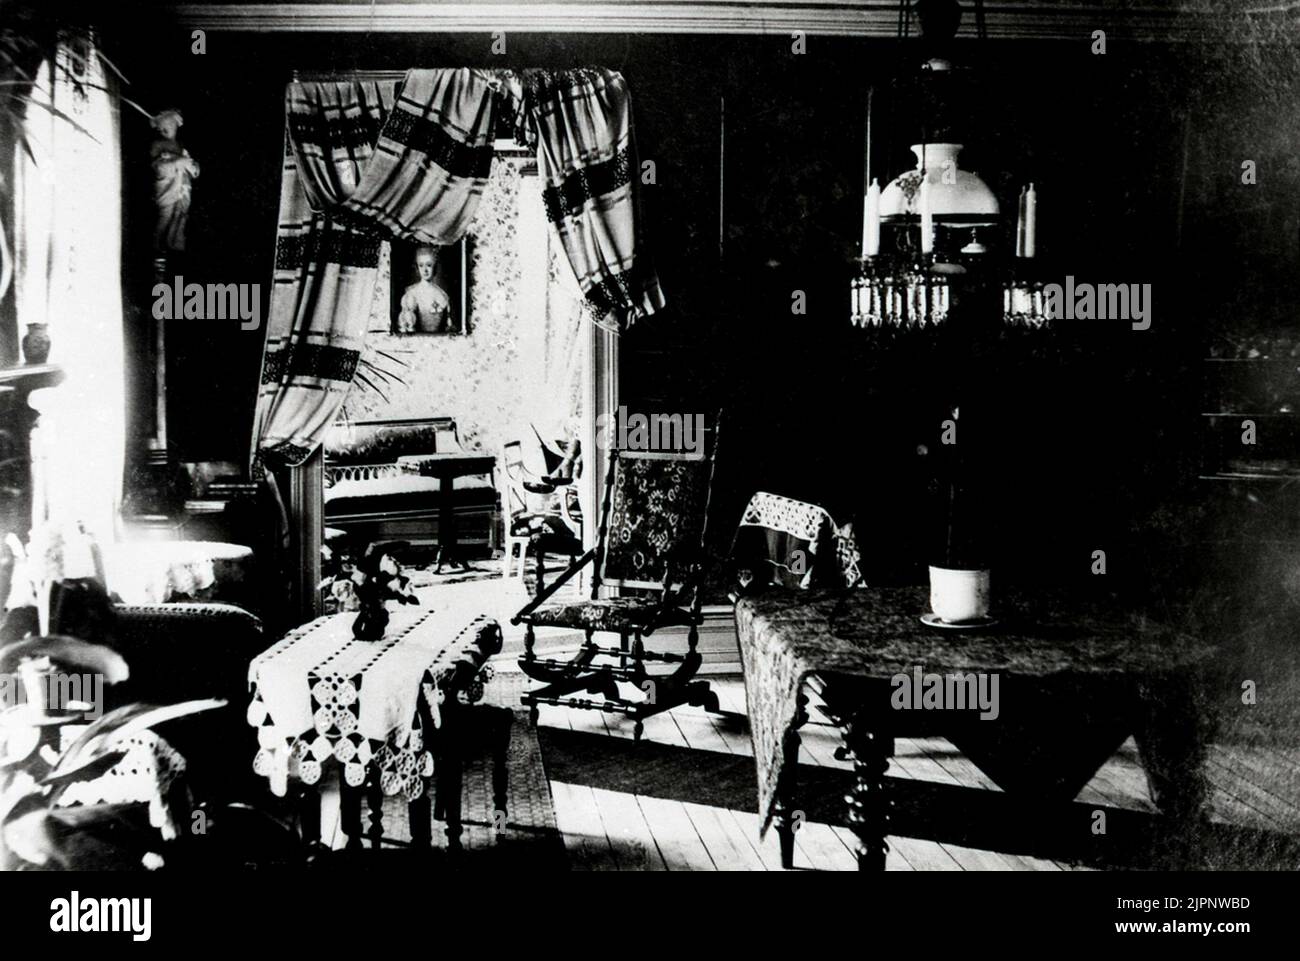 The Storgatan 20 property was acquired in 1900 by company N. Ekman. Otto & Helga Warenberg's home, Storgatan 20. German plot. Photo taken 1902 before the auction. The camera has been standing in front of the tambourine door. You look through the 'hall' into the atrium. The queen board hangs on the outer wall towards Ekman's alley. The windows are towards Storgatan. The wide white embroidery at the rocking chair belongs to a large cloth, which covers the table piano, which in its time was passed on the road to Höryda, Härlunda, Helga's home. The curtains were home -woven. Fastigheten Storgatan Stock Photo